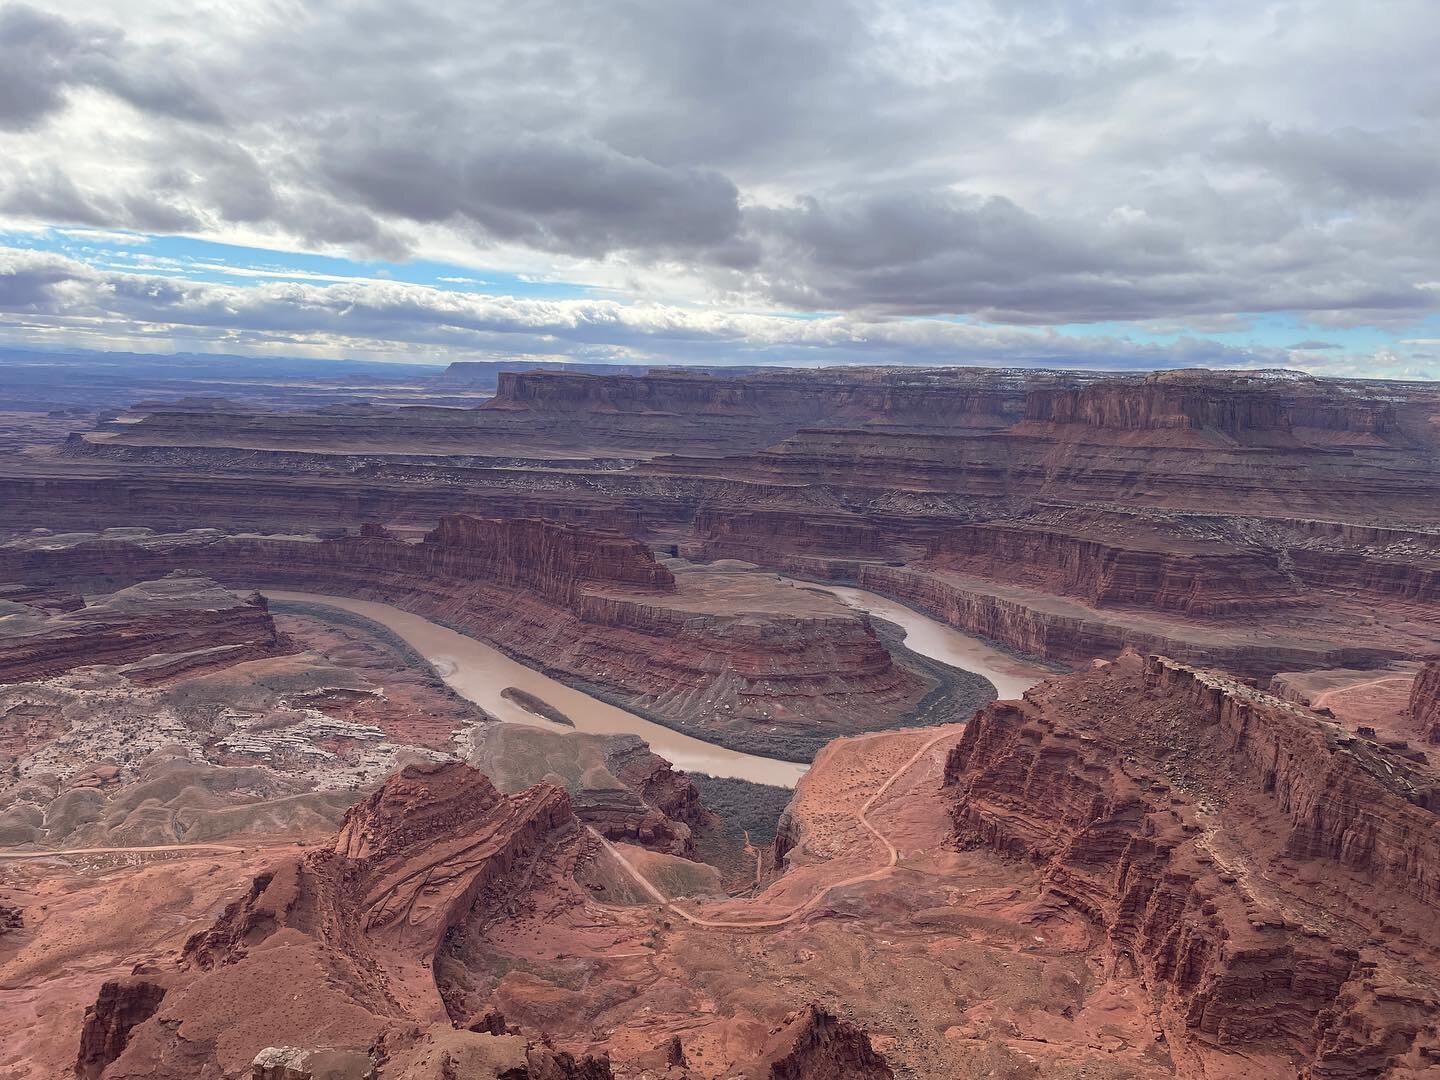 Today we made our way out to Dead Horse Point for another amazing vista. The scale and vastness of the landscape from this perspective was awe inspiring!! This is wide open country that could take weeks if not months to fully experience all it has to